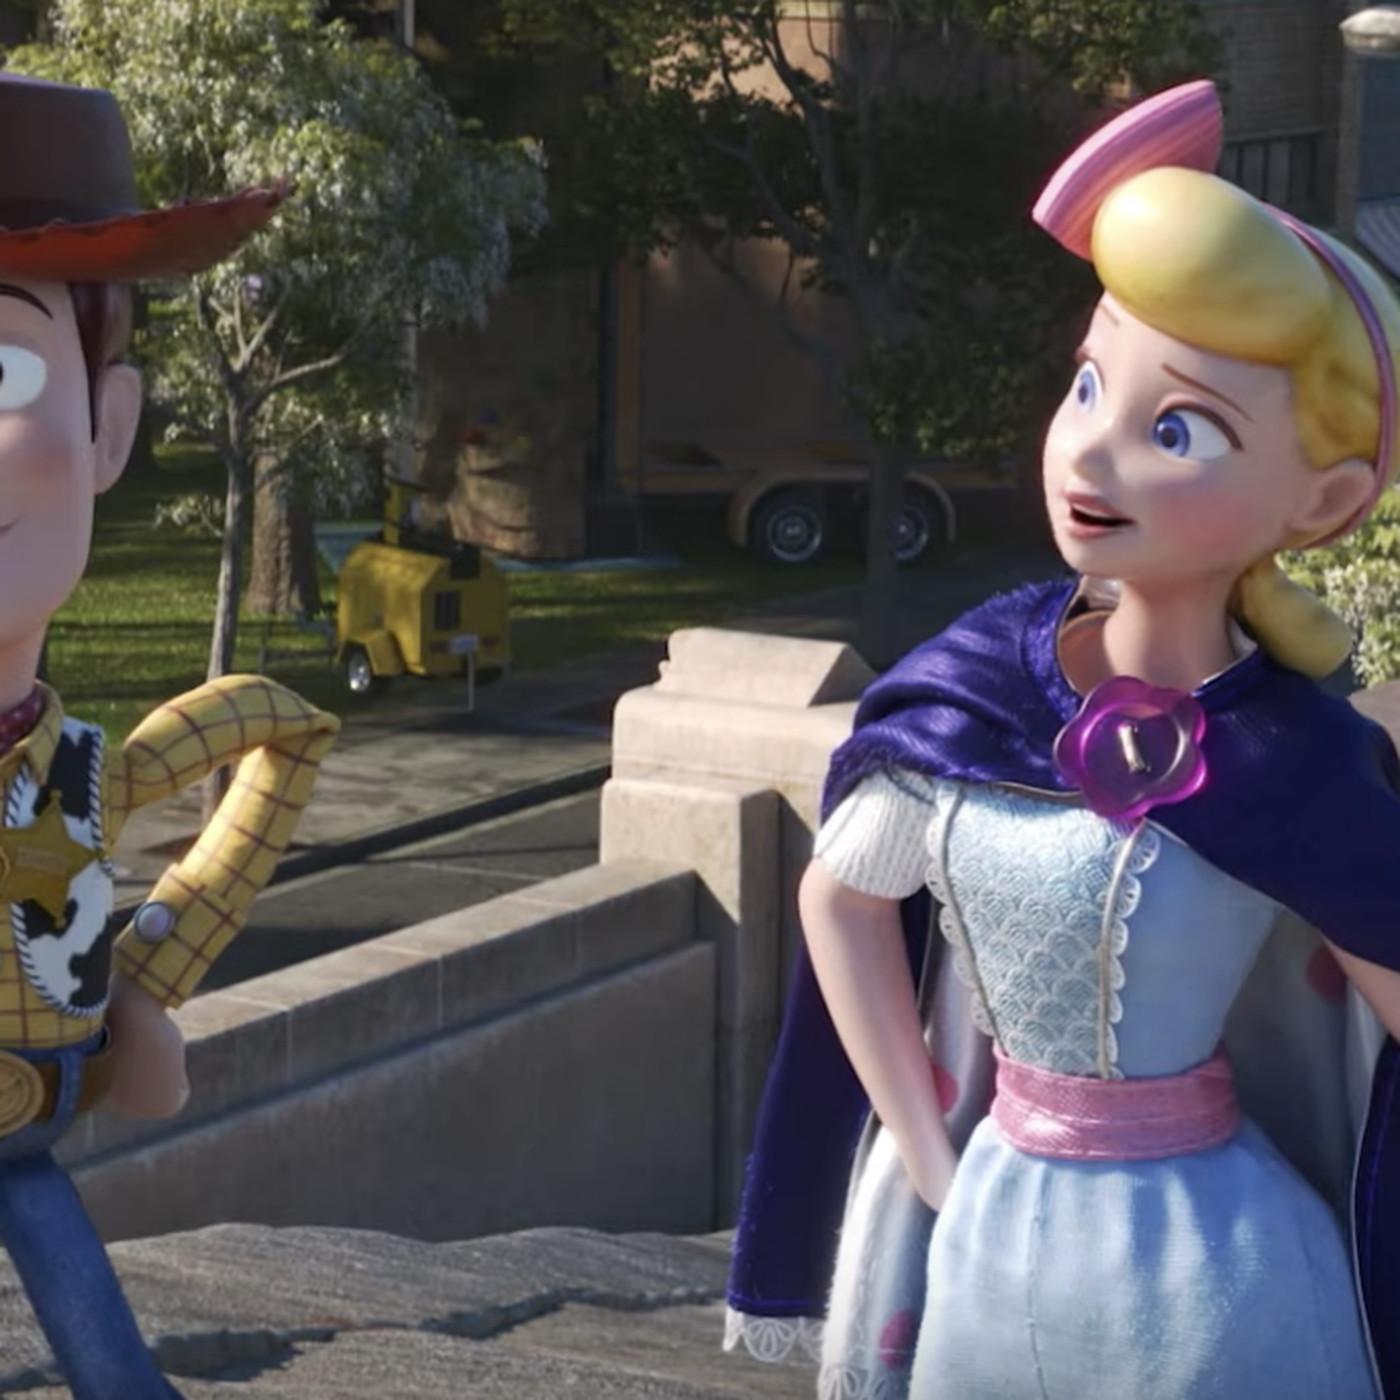 New Toy Story 4 teaser brings Bo Peep back to the franchise